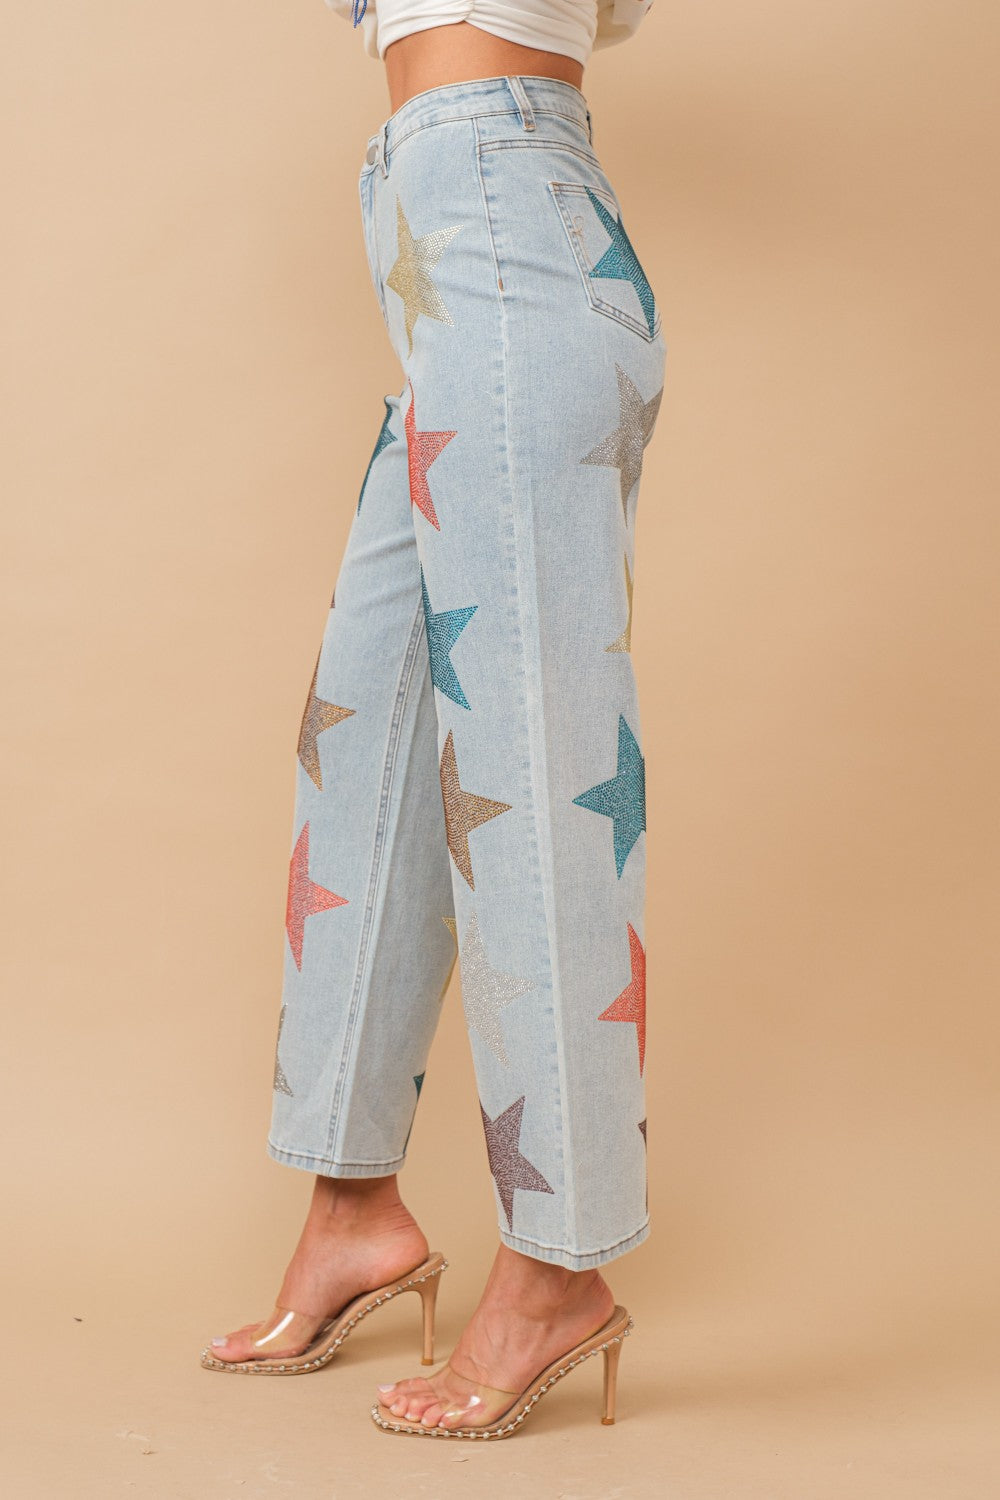 high-quality denim, these straight-leg jeans are adorned with multi-colored stars,